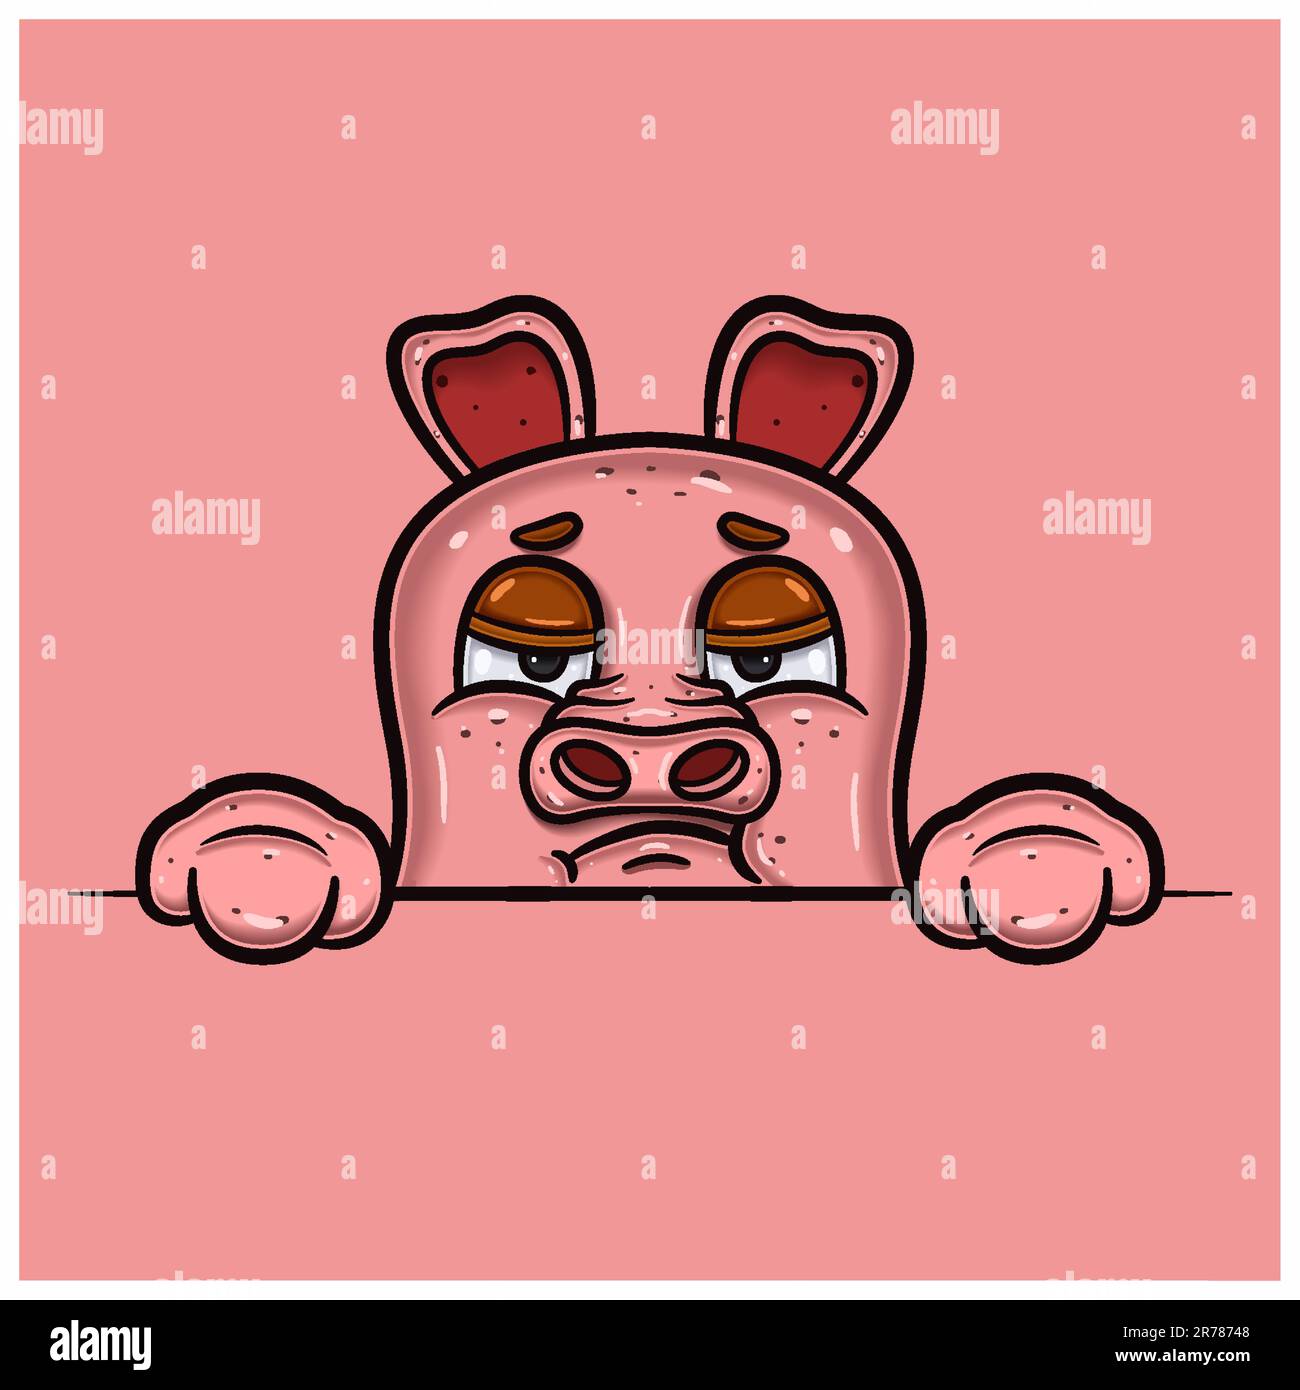 Bored Face Expression With Pig Cartoon. Vector and Illustration Stock Vector